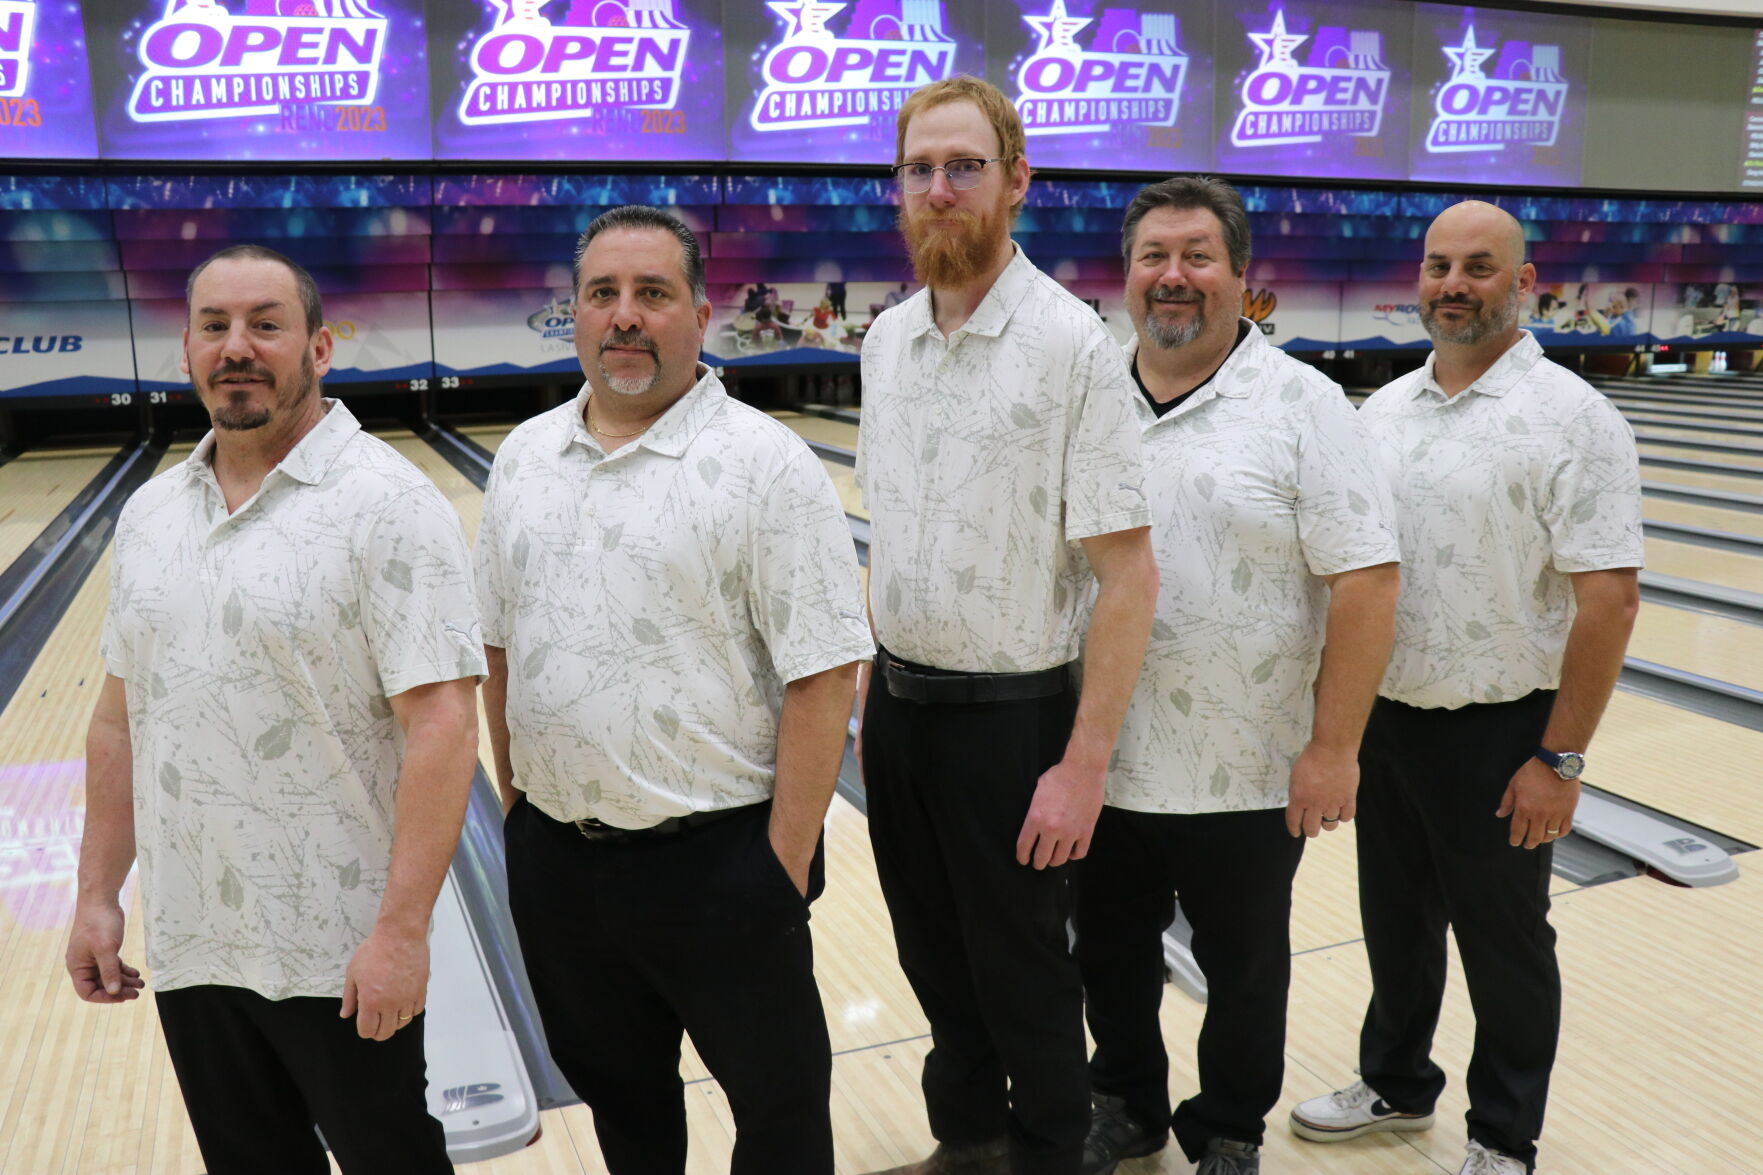 Local Roundup Flagstaff Bowling Group Starts Solid At 2023 Usbc Open Championships Bvm Sports 0223